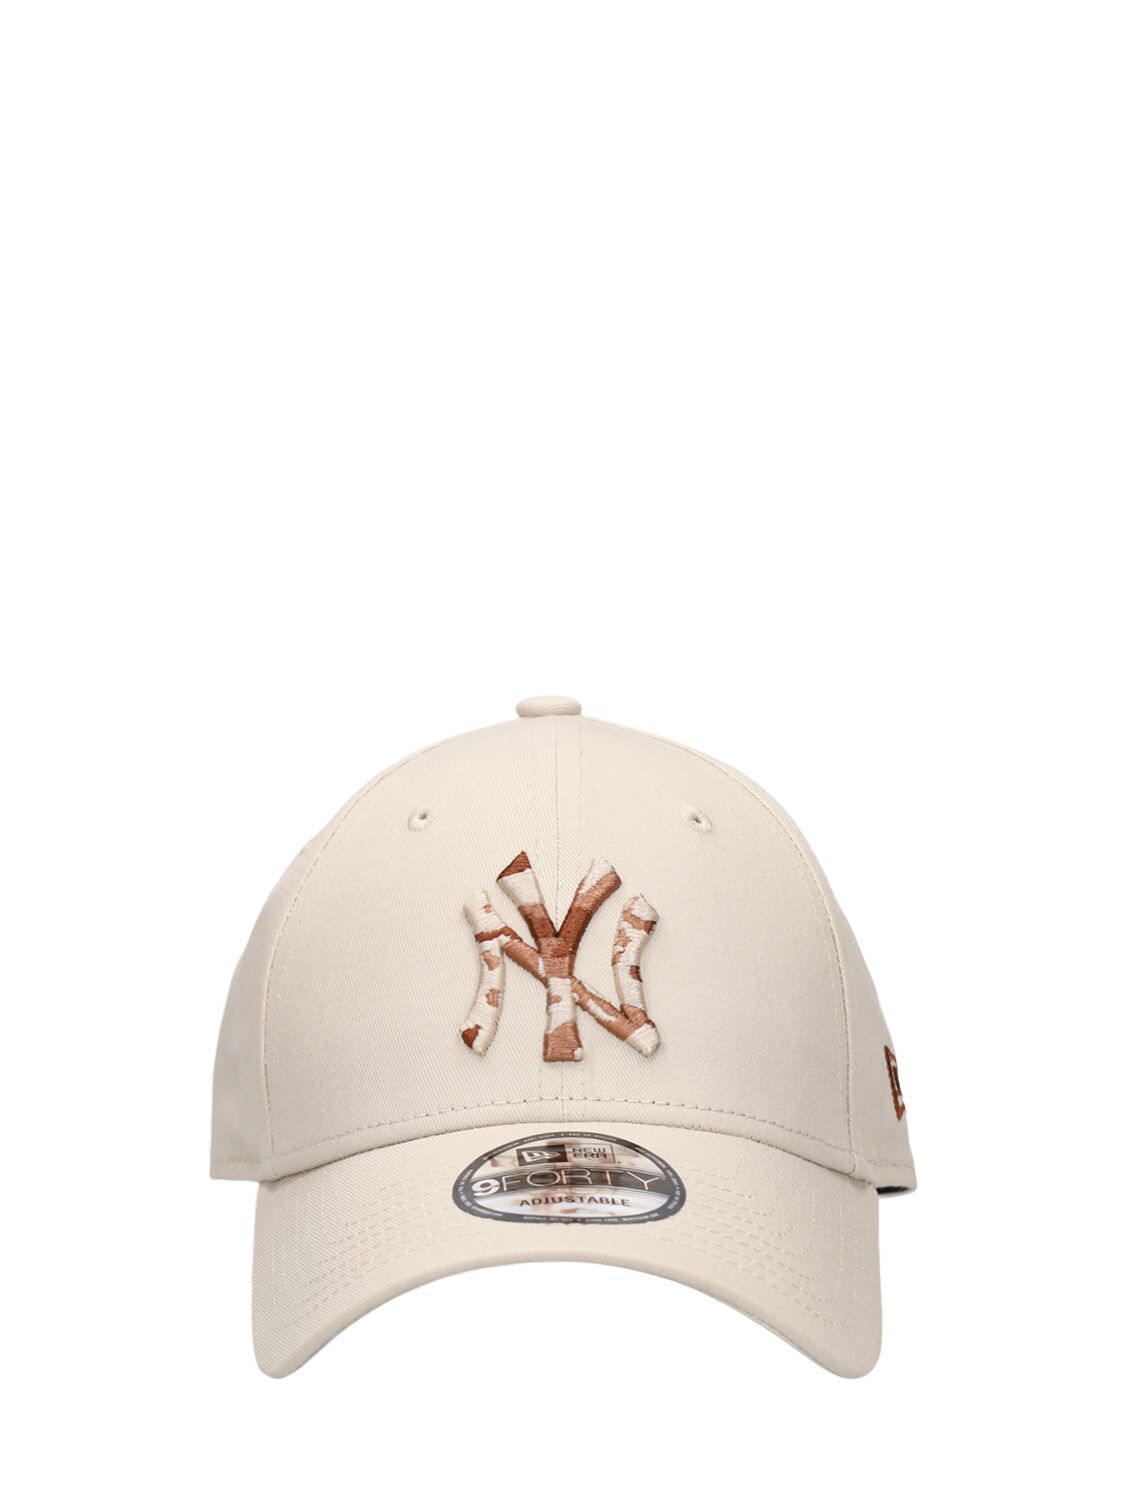 Image of Ny Yankees Infill 9forty Cotton Cap